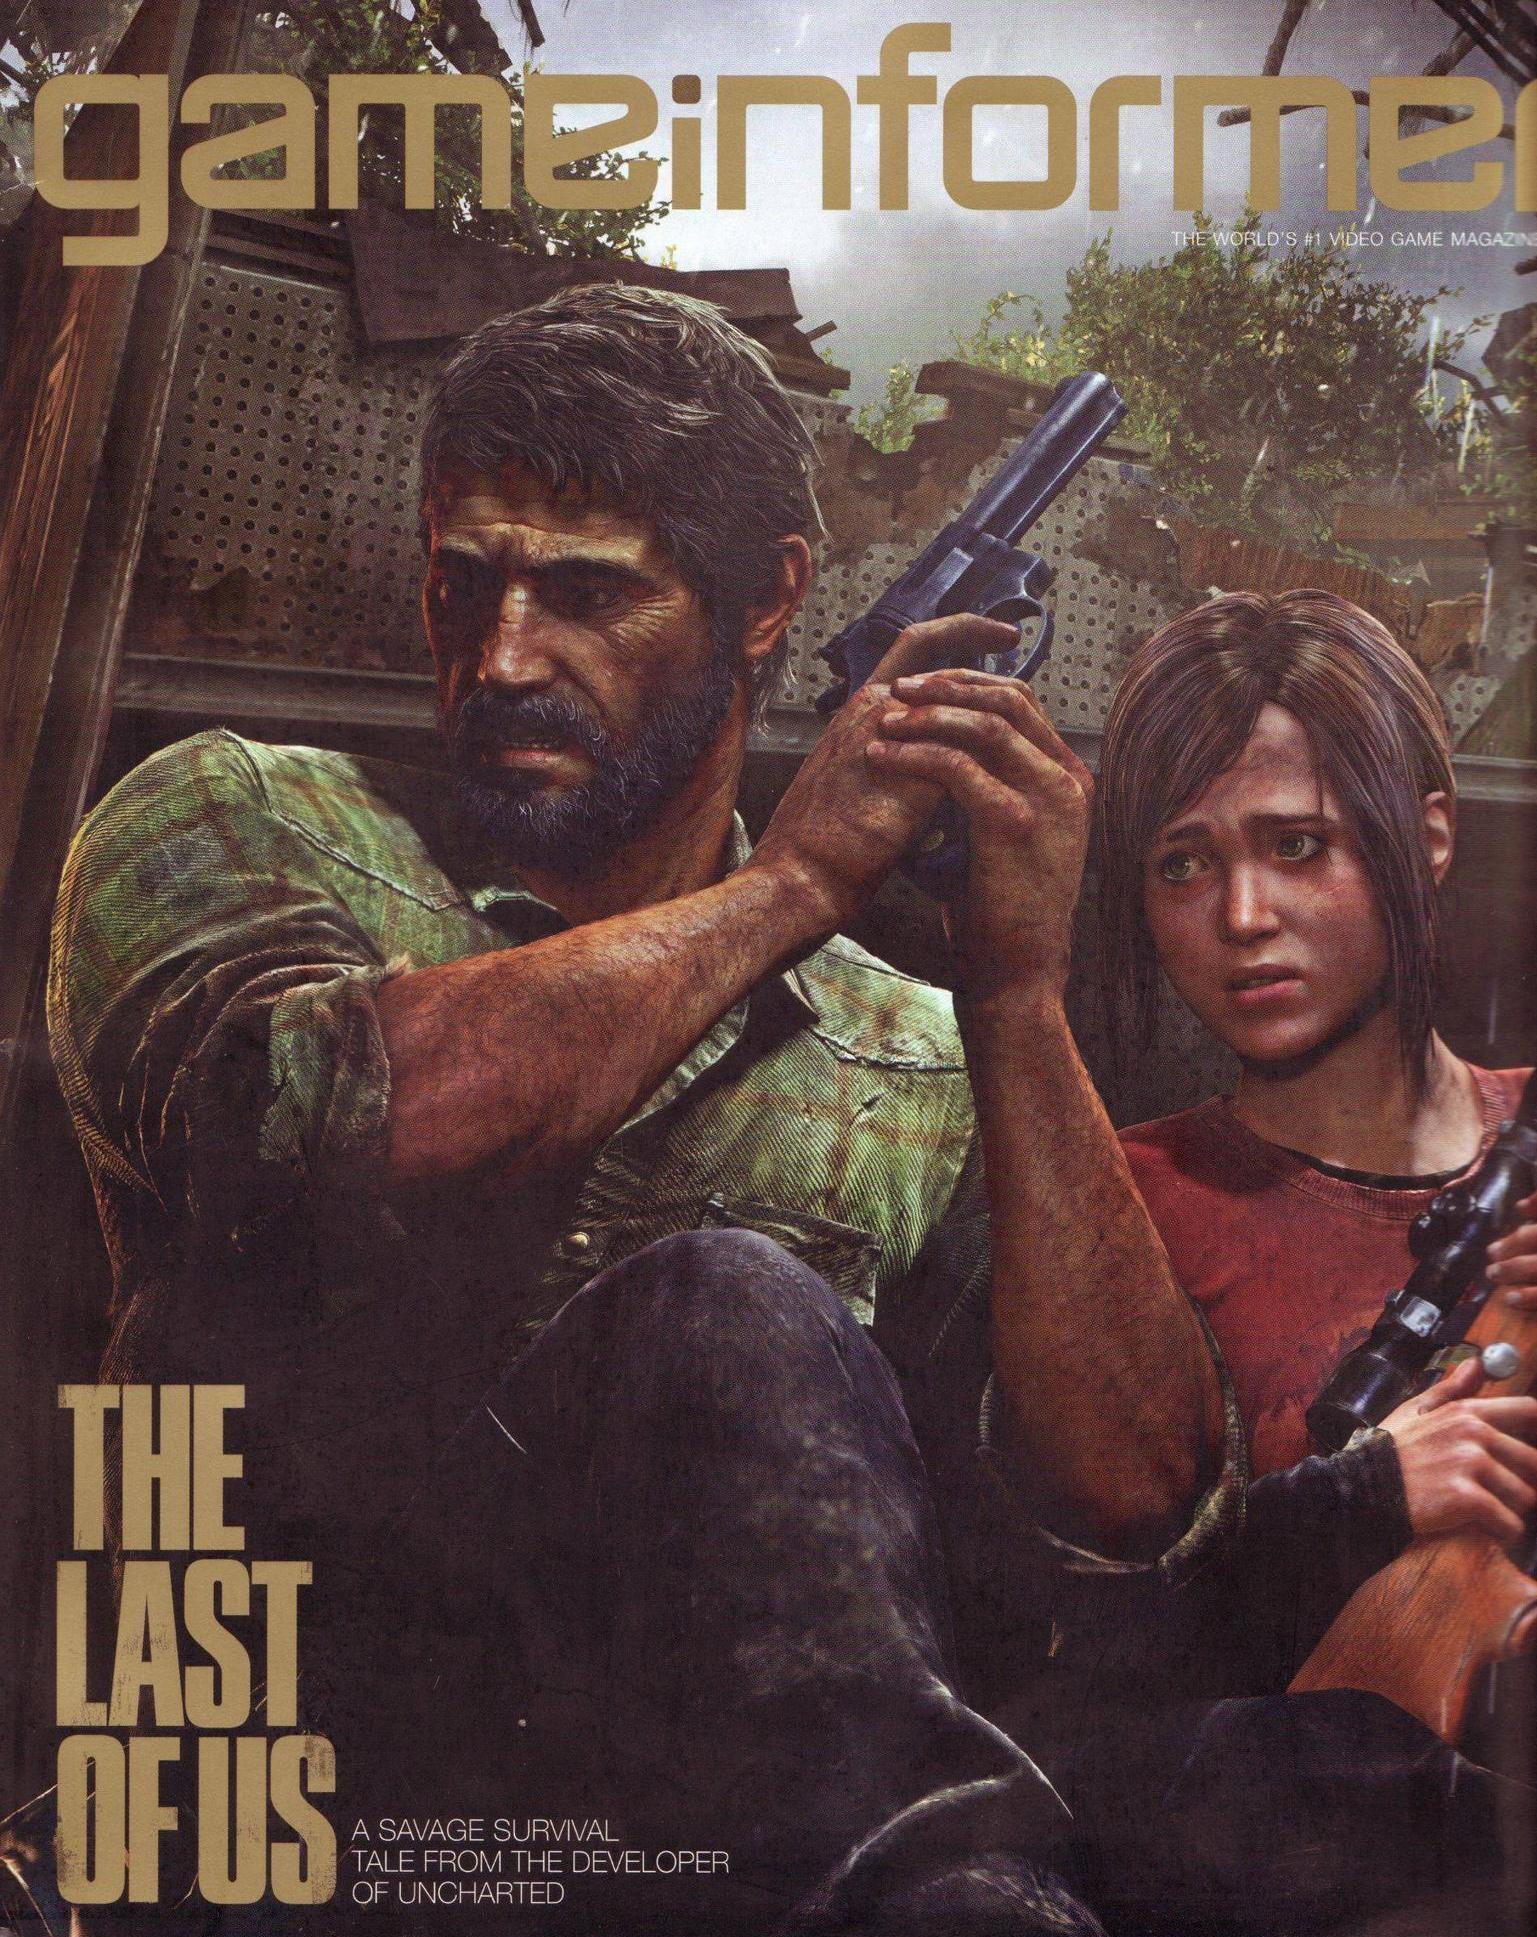 Ps3 patches. The last of us 1 обложка. The last of us игра. The last of us ps3. The last of us 3 обложка.